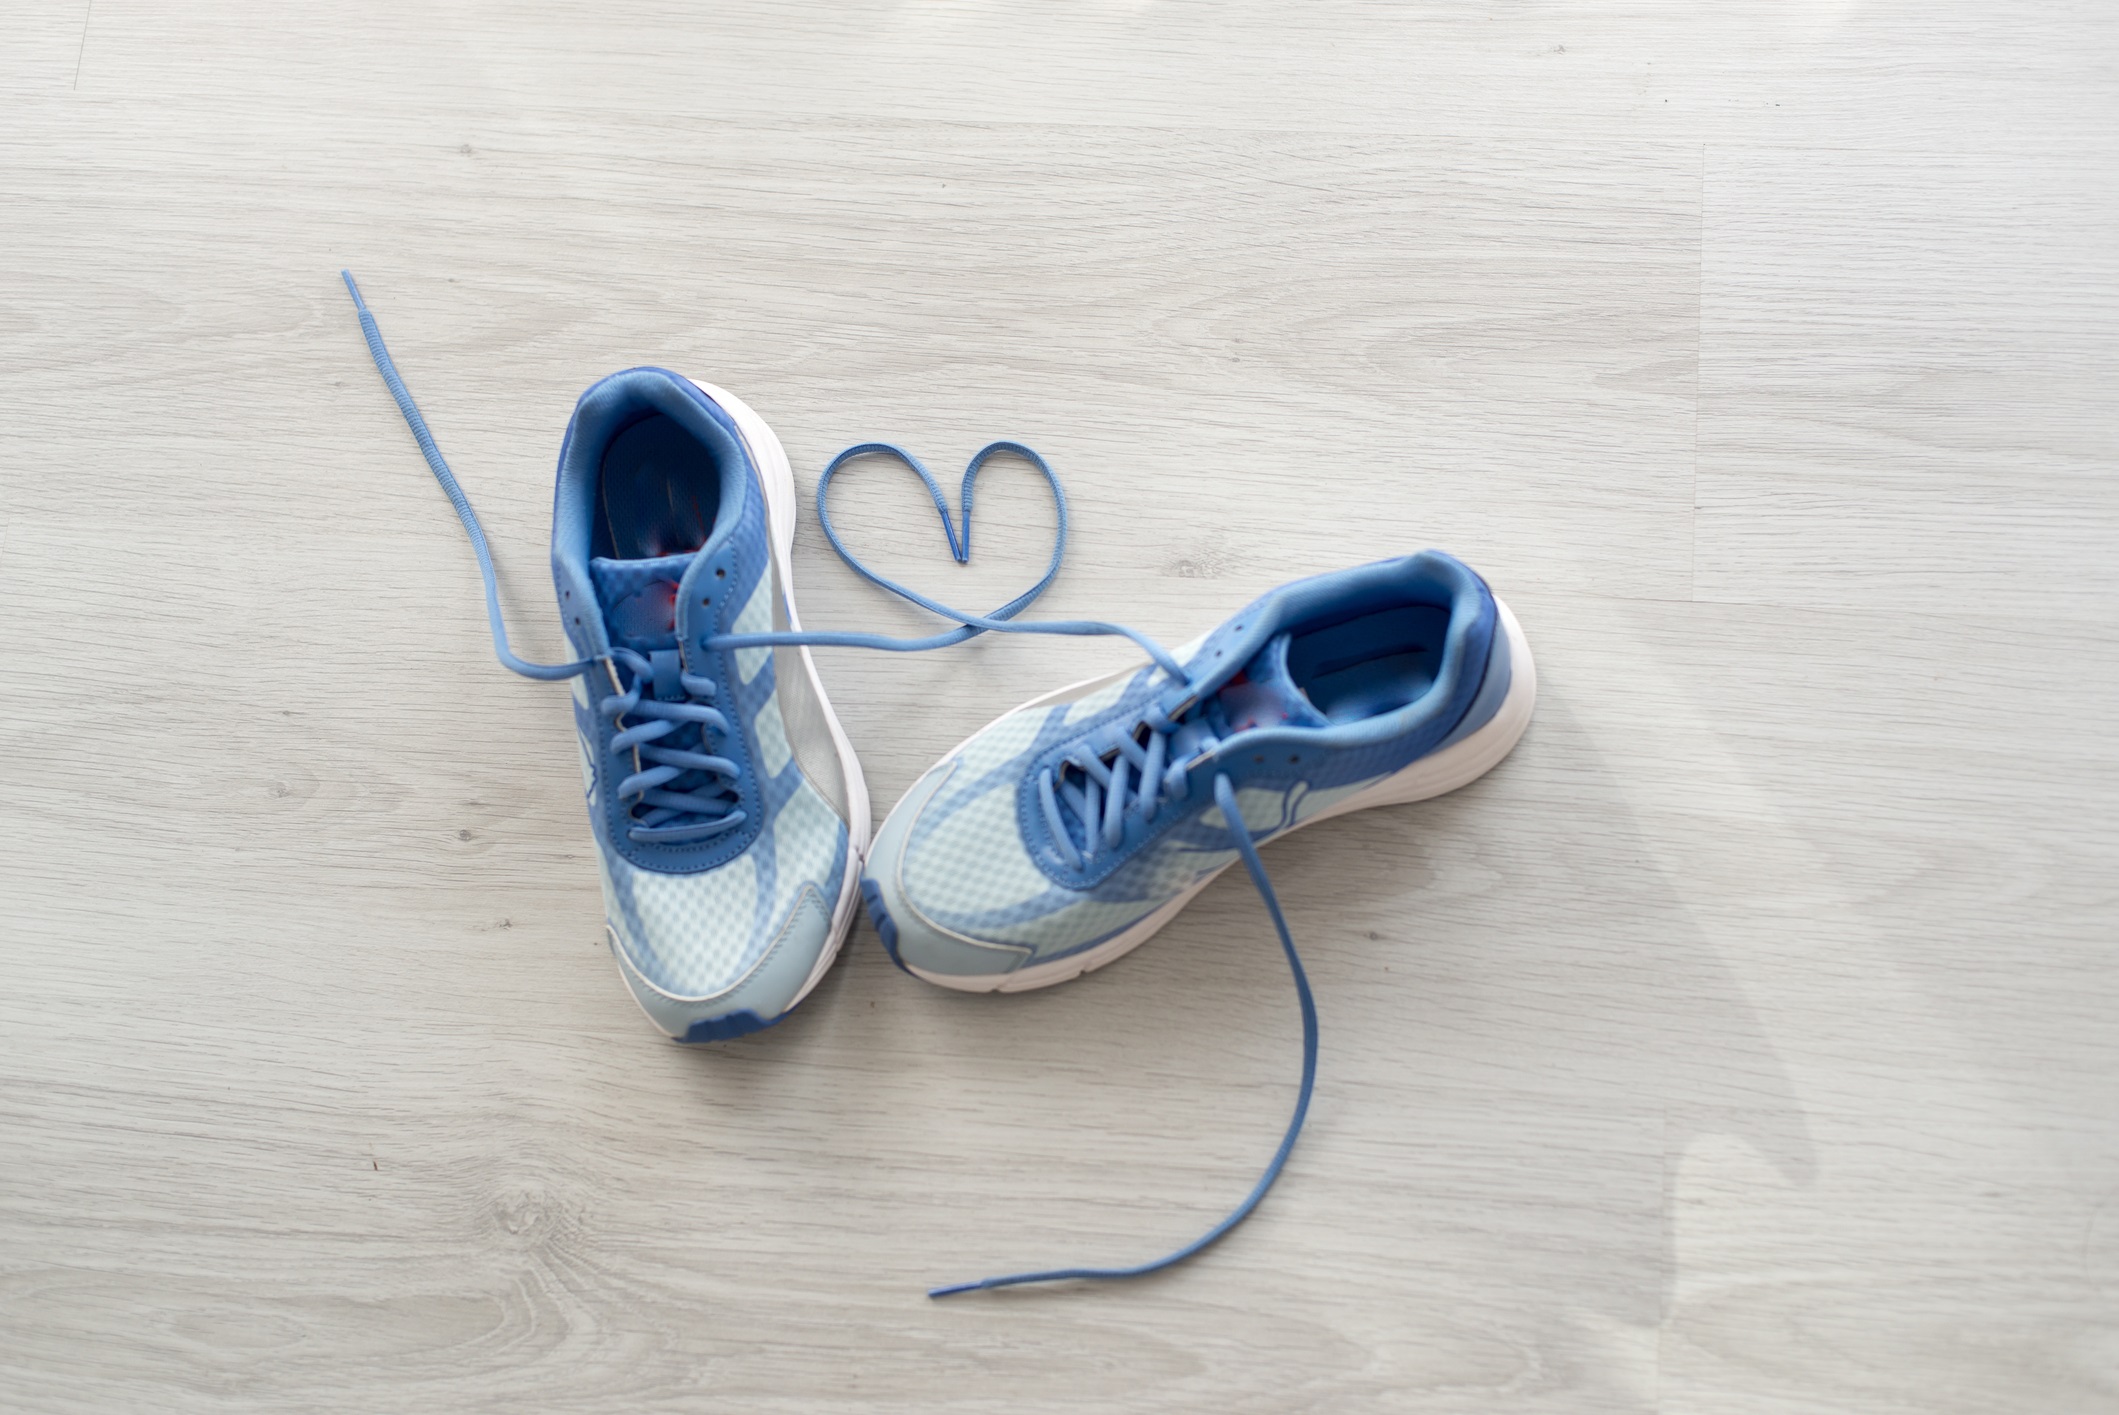 Blue and gray sneakers form the shape of a heart with the laces.